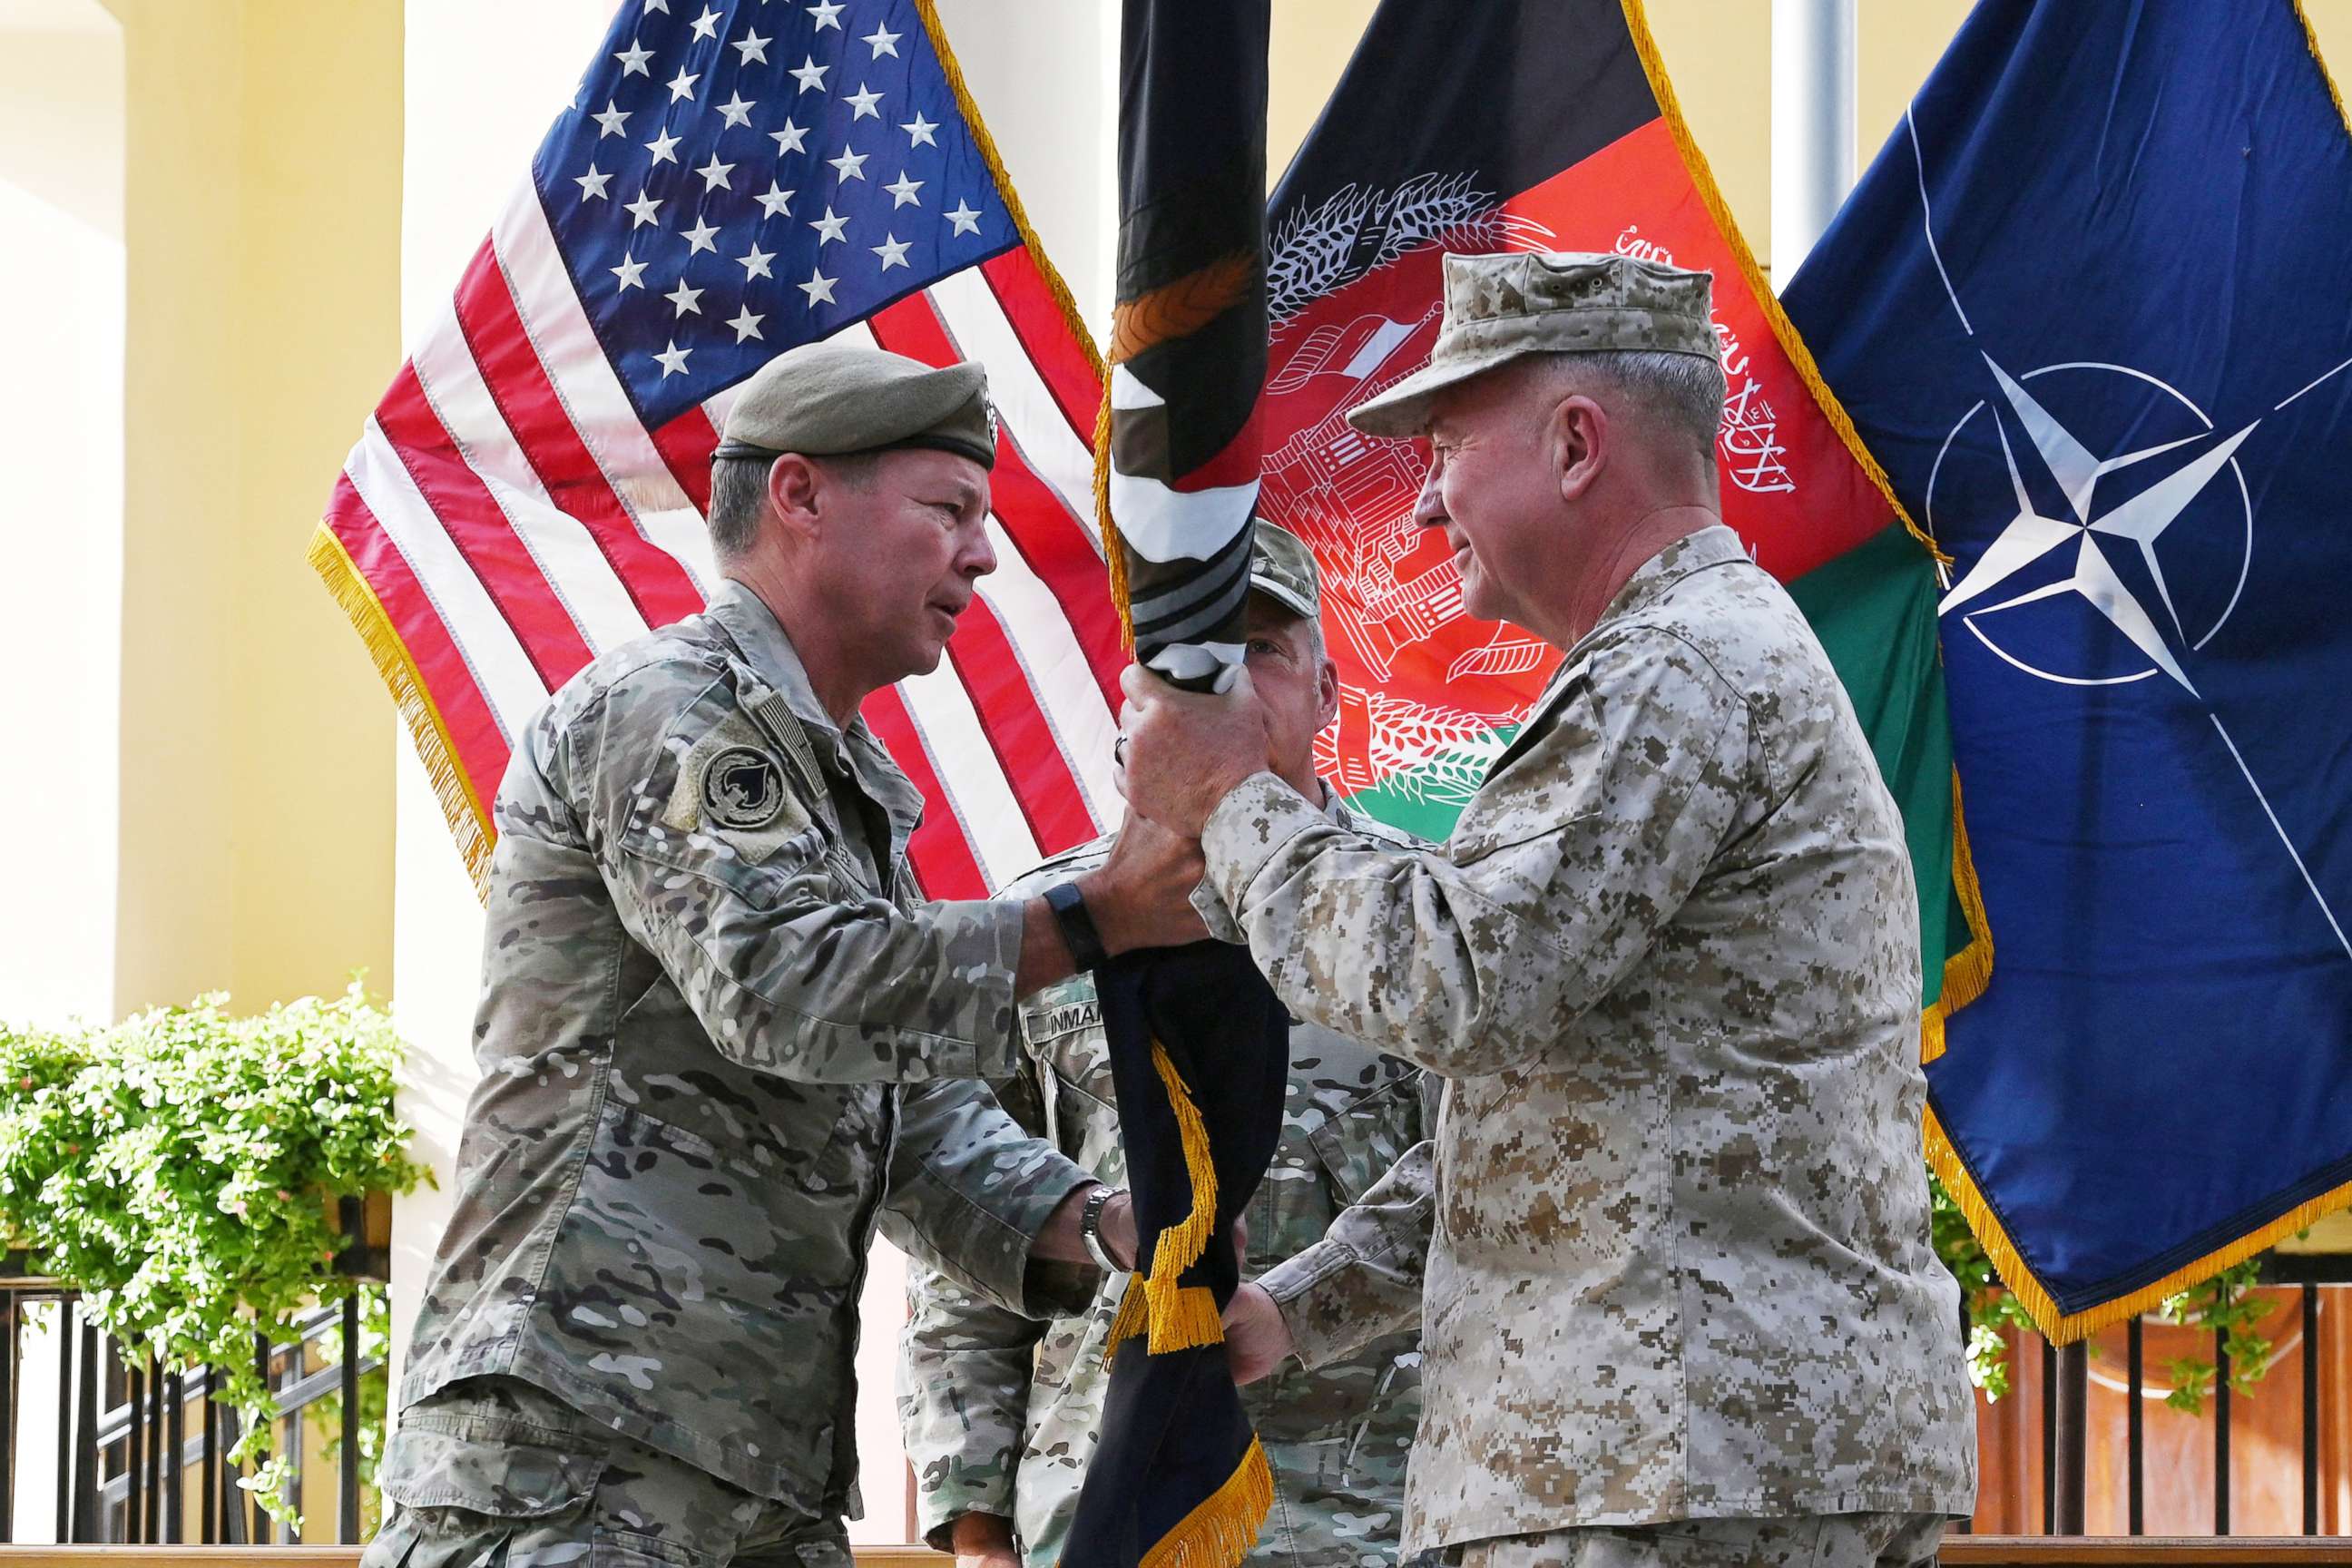 PHOTO: General Kenneth McKenzie receives the flag of U.S.-led Resolute Support mission from General Austin "Scott" Miller during an official handover ceremony at the Resolute Support headquarters in the Green Zone in Kabul on July 12, 2021.